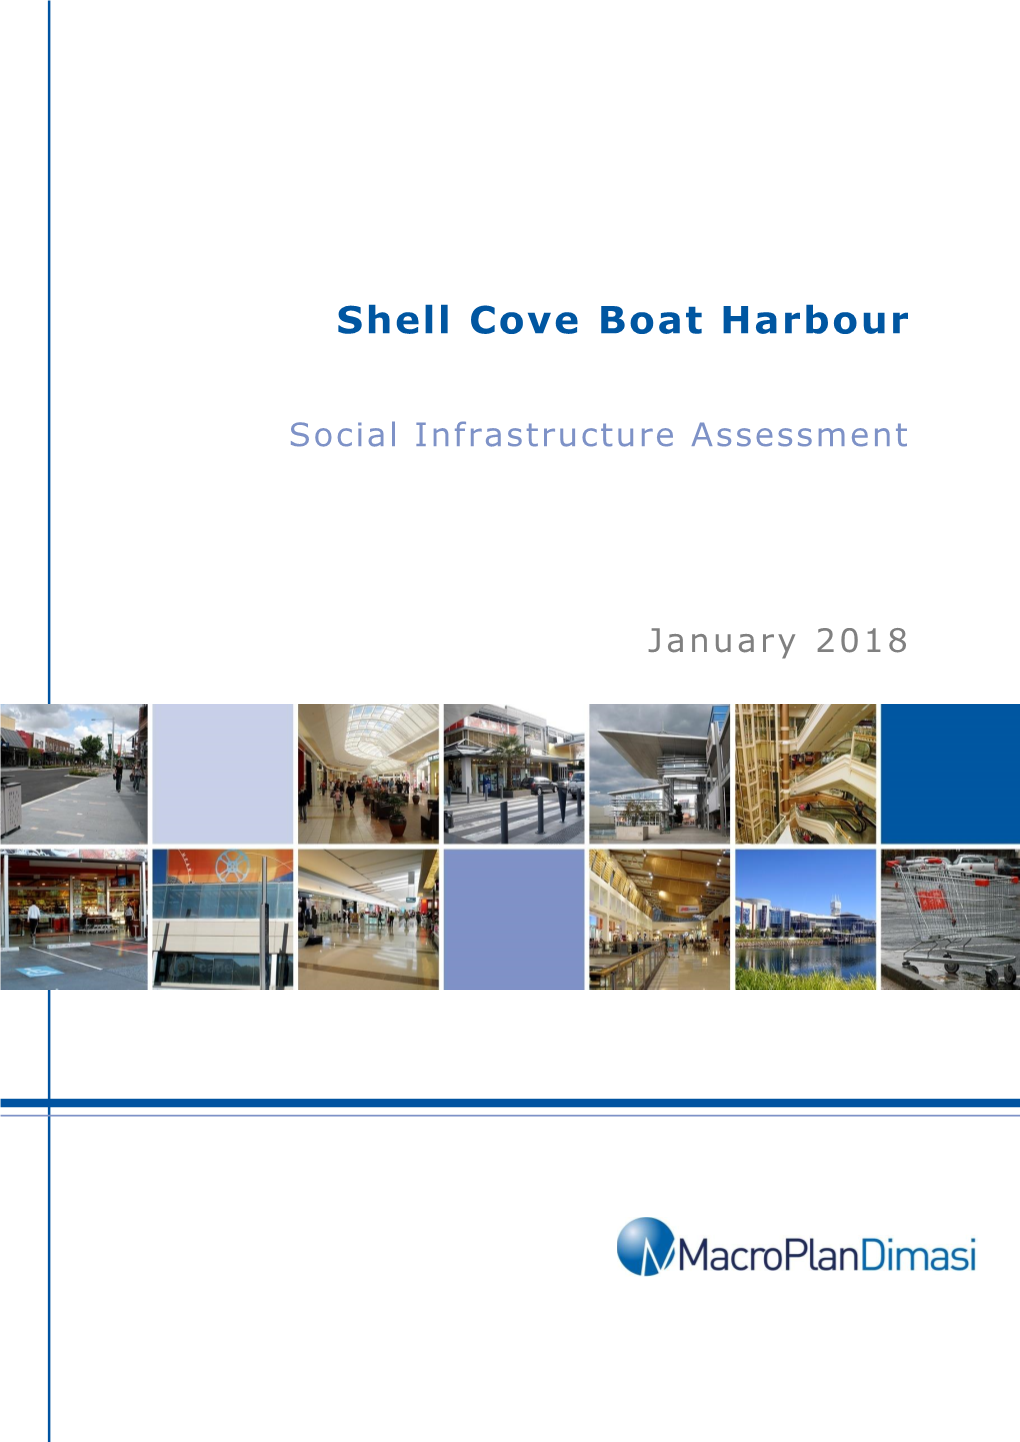 Shell Cove Boat Harbour